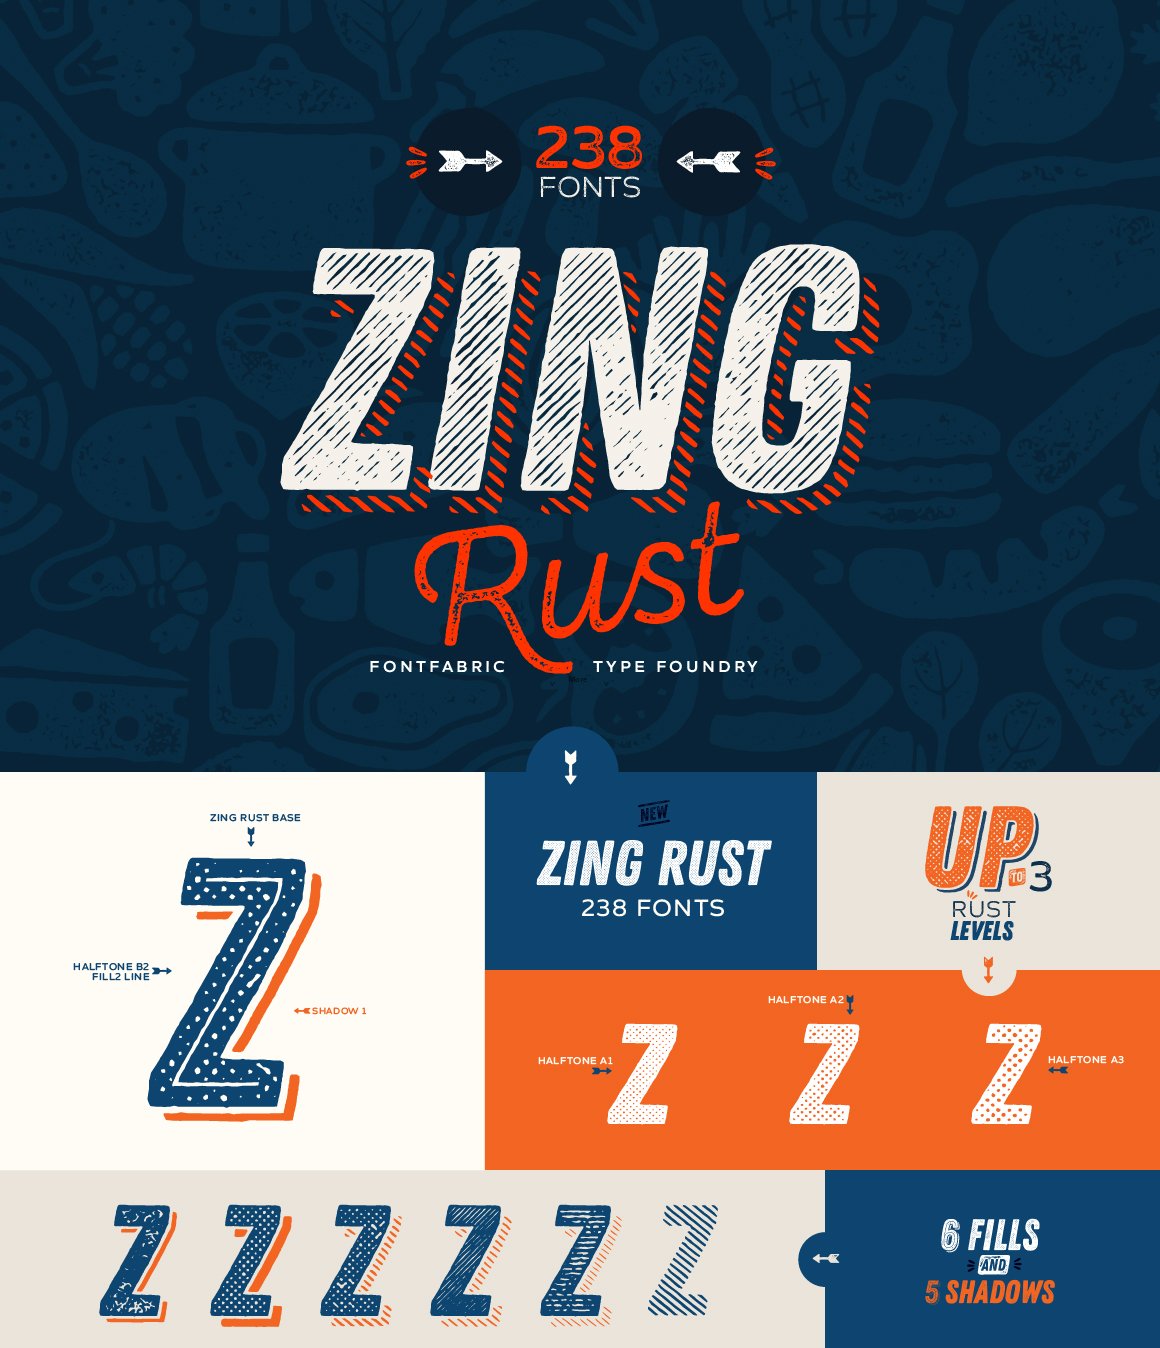 Zing Rust cover image.